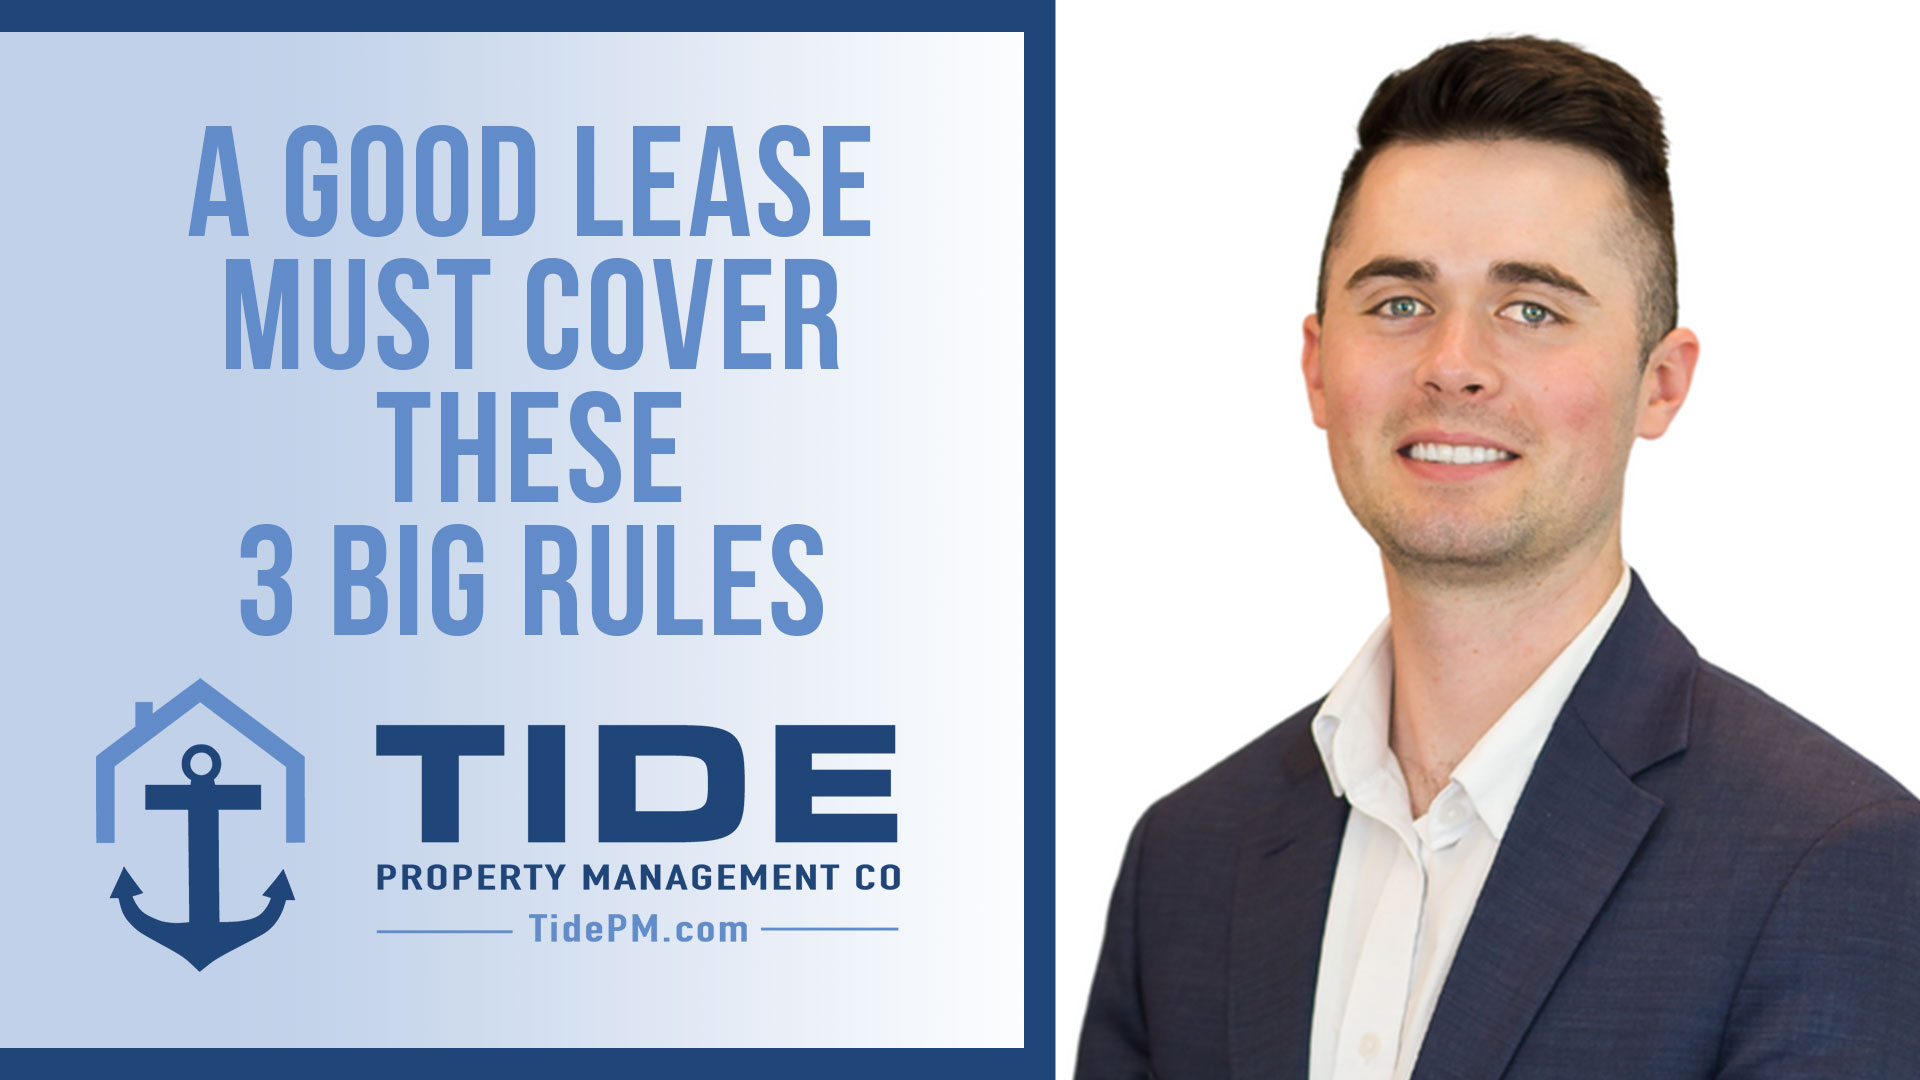 The 3 Types of Rules You Need To Have in a Good Lease